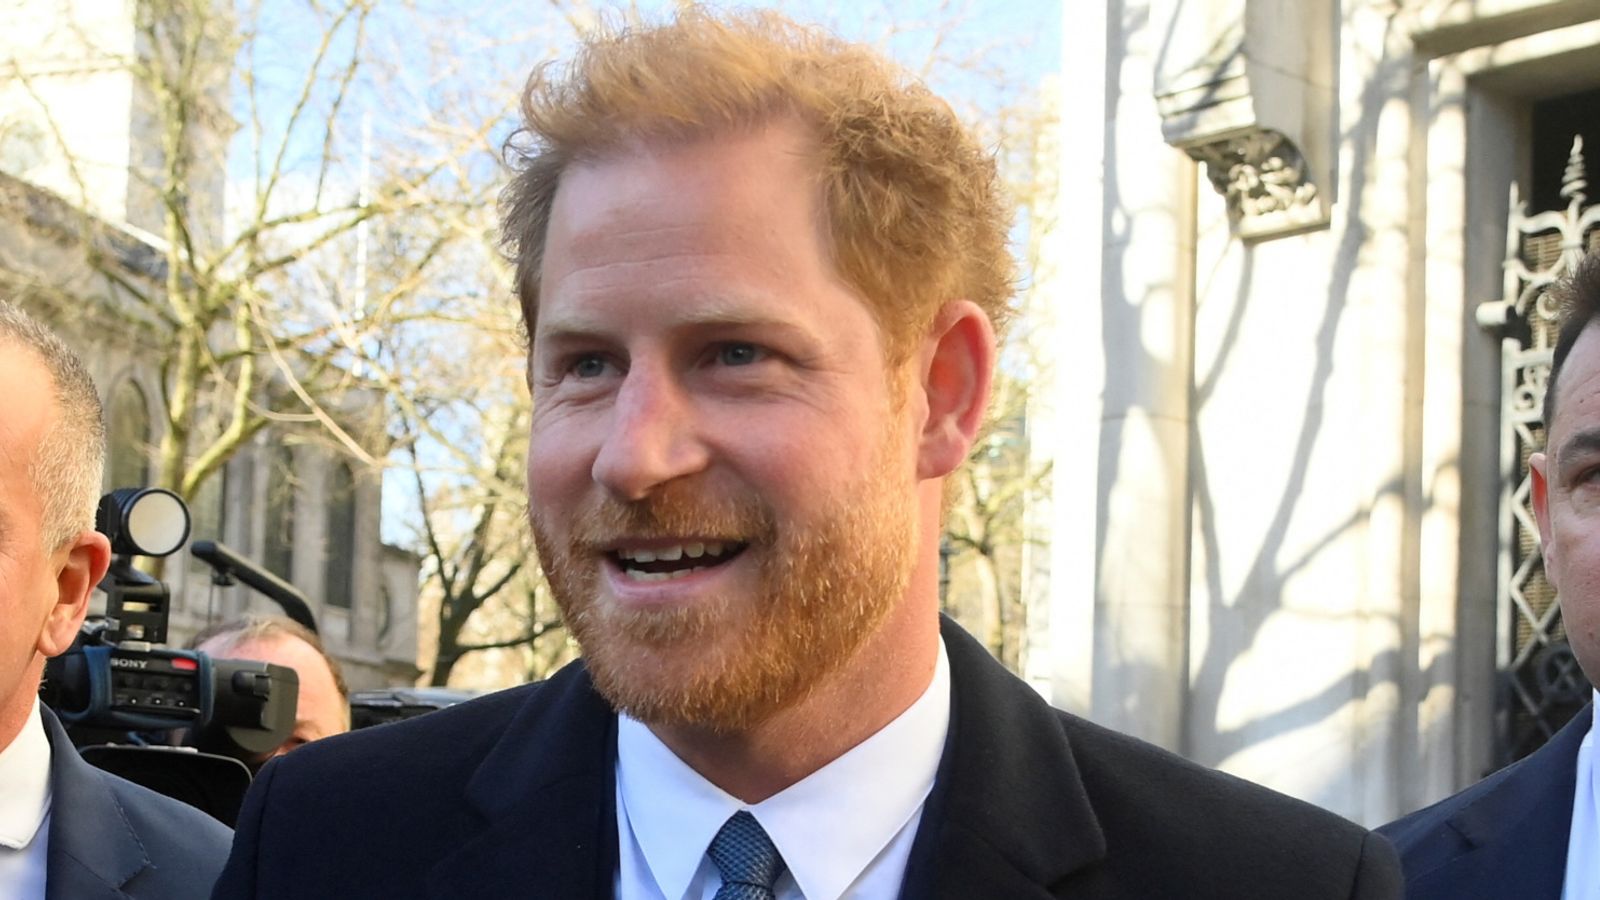 Prince Harry at High Court for phone-tapping and privacy case